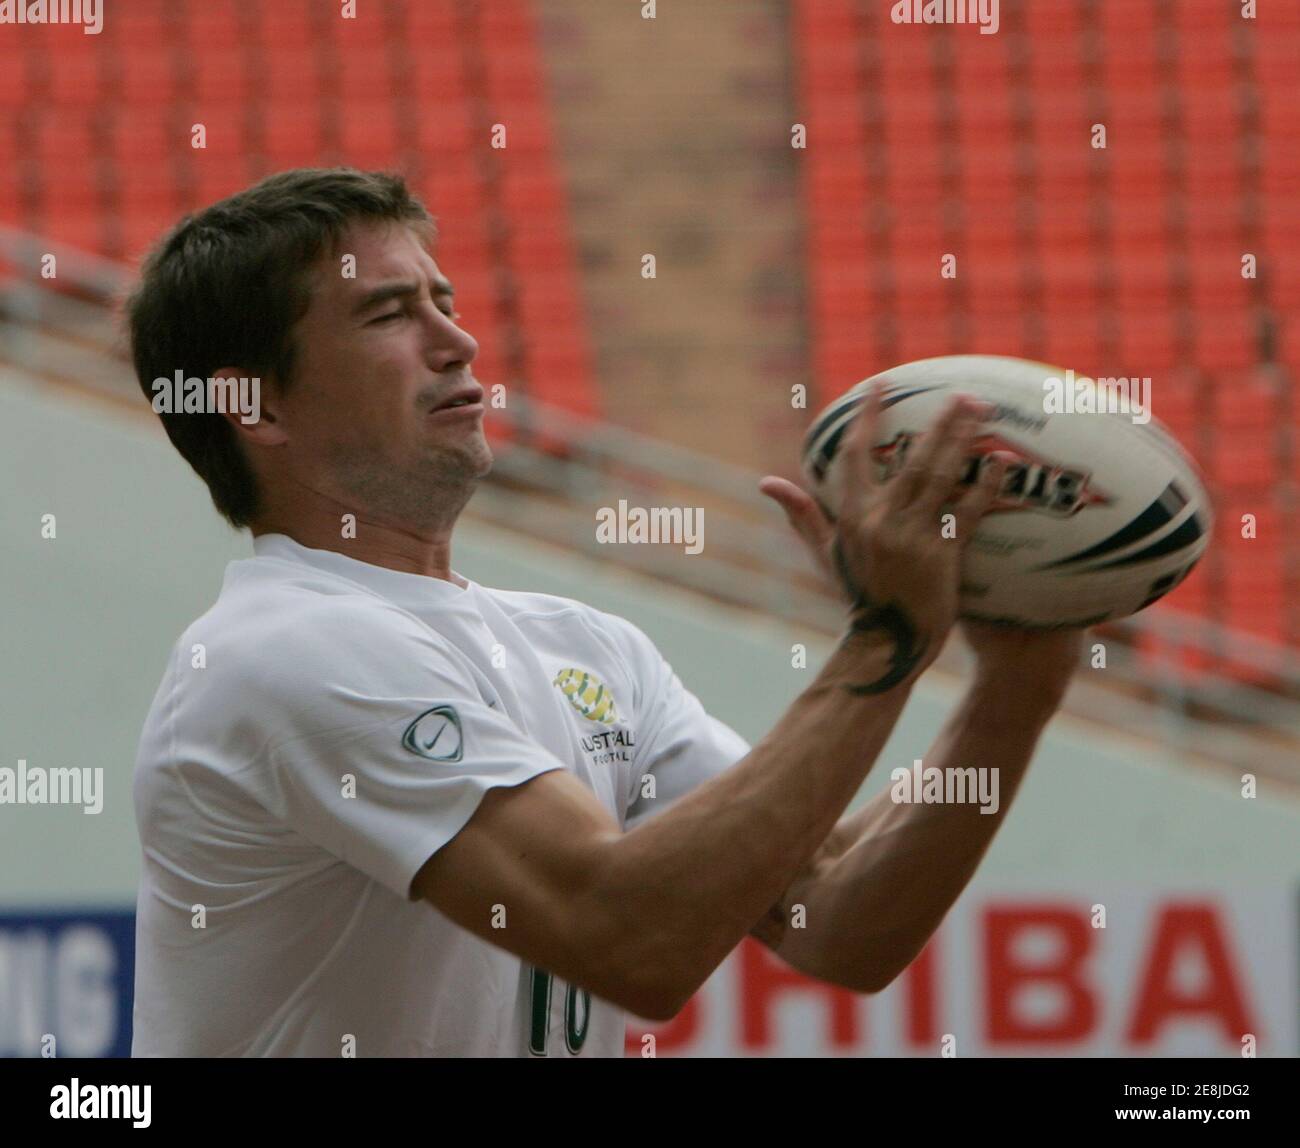 Australia's soccer player Harry Kewell plays with a football during a practice session for the upcoming AFC Asian Cup 2007 in Bangkok July 5, 2007. Australia is scheduled to play Oman in the Asian Cup on July 8.   REUTERS/Chaiwat Subprasom  (THAILAND) Stock Photo